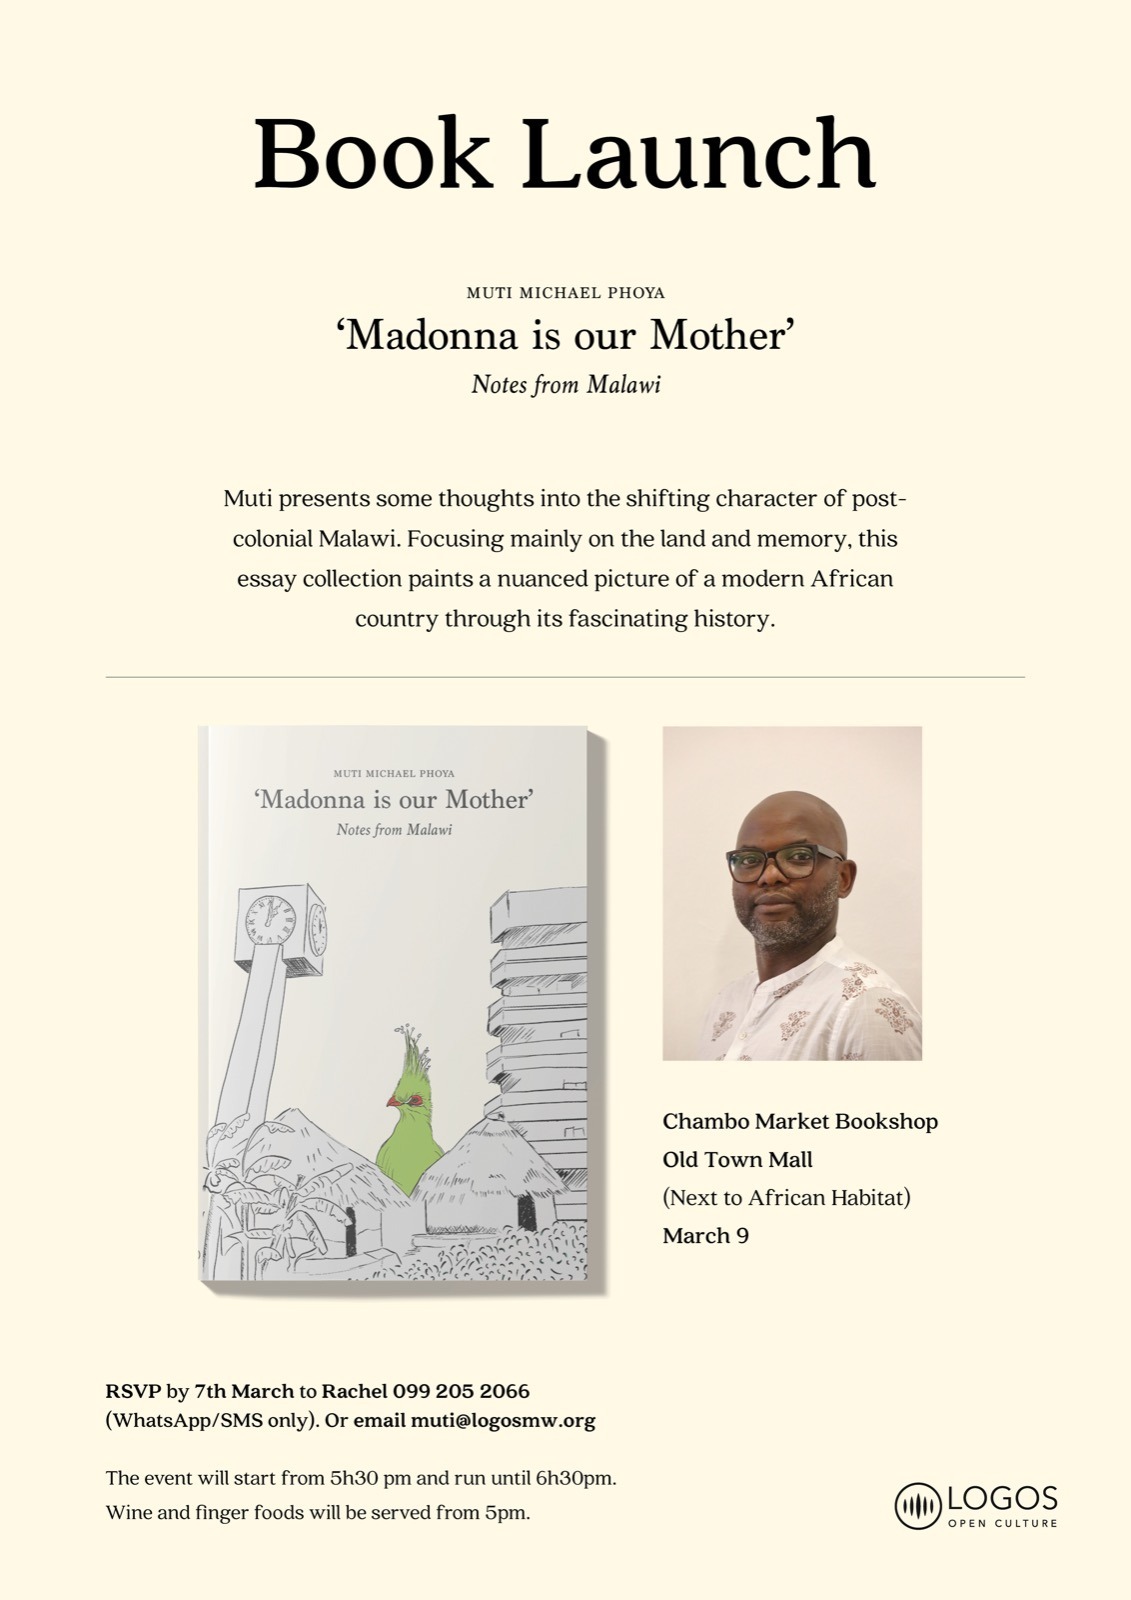 Poster of the book launch of 'Madonna is our Mother': Notes from Malawi by Muti Michael Phoya published by Logos Open Culture